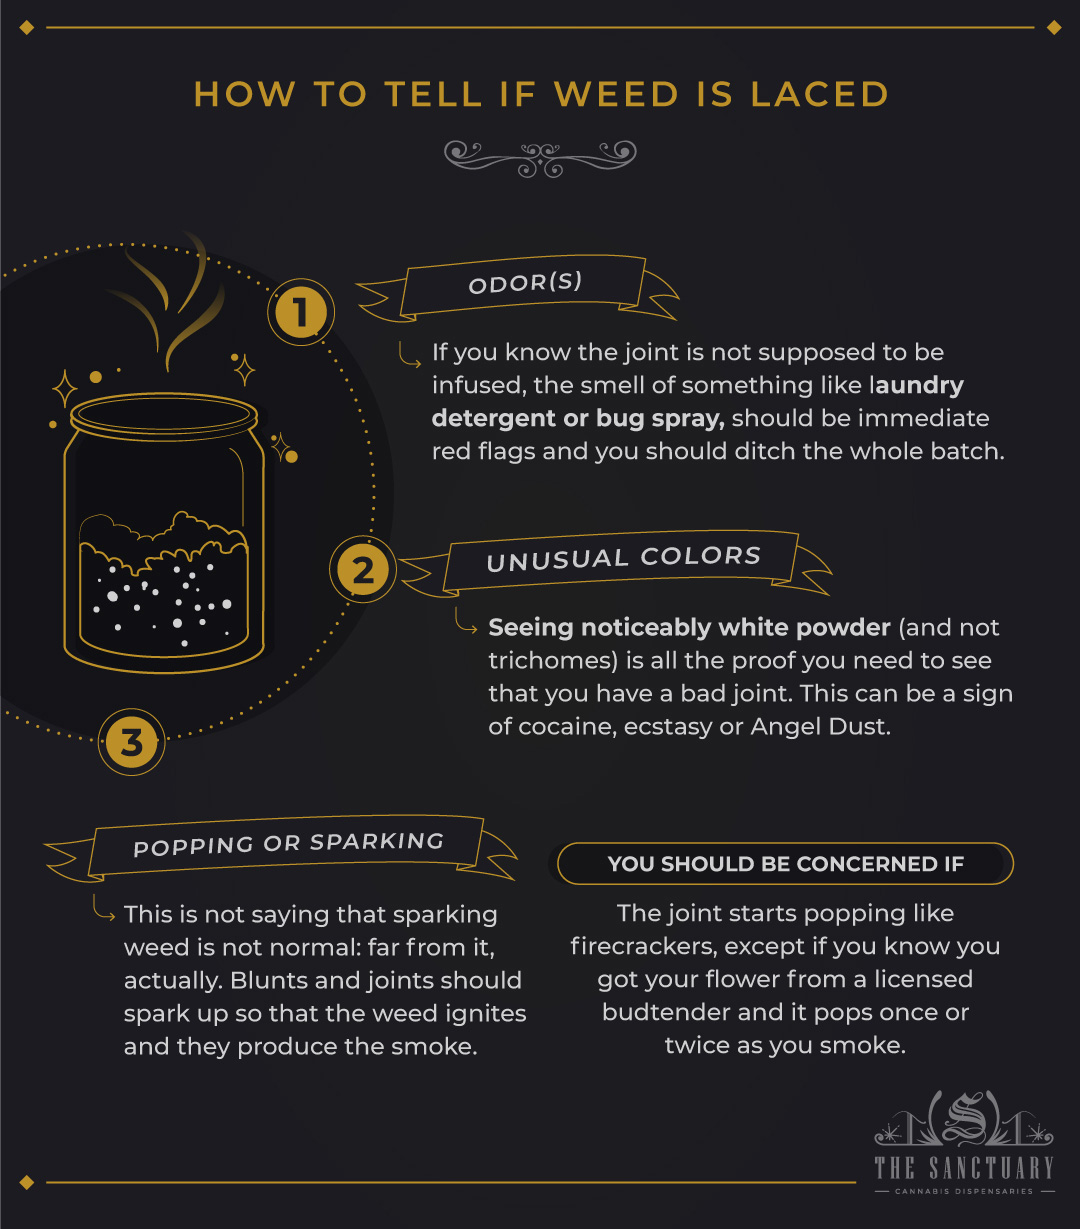 How to Tell if Weed is Laced